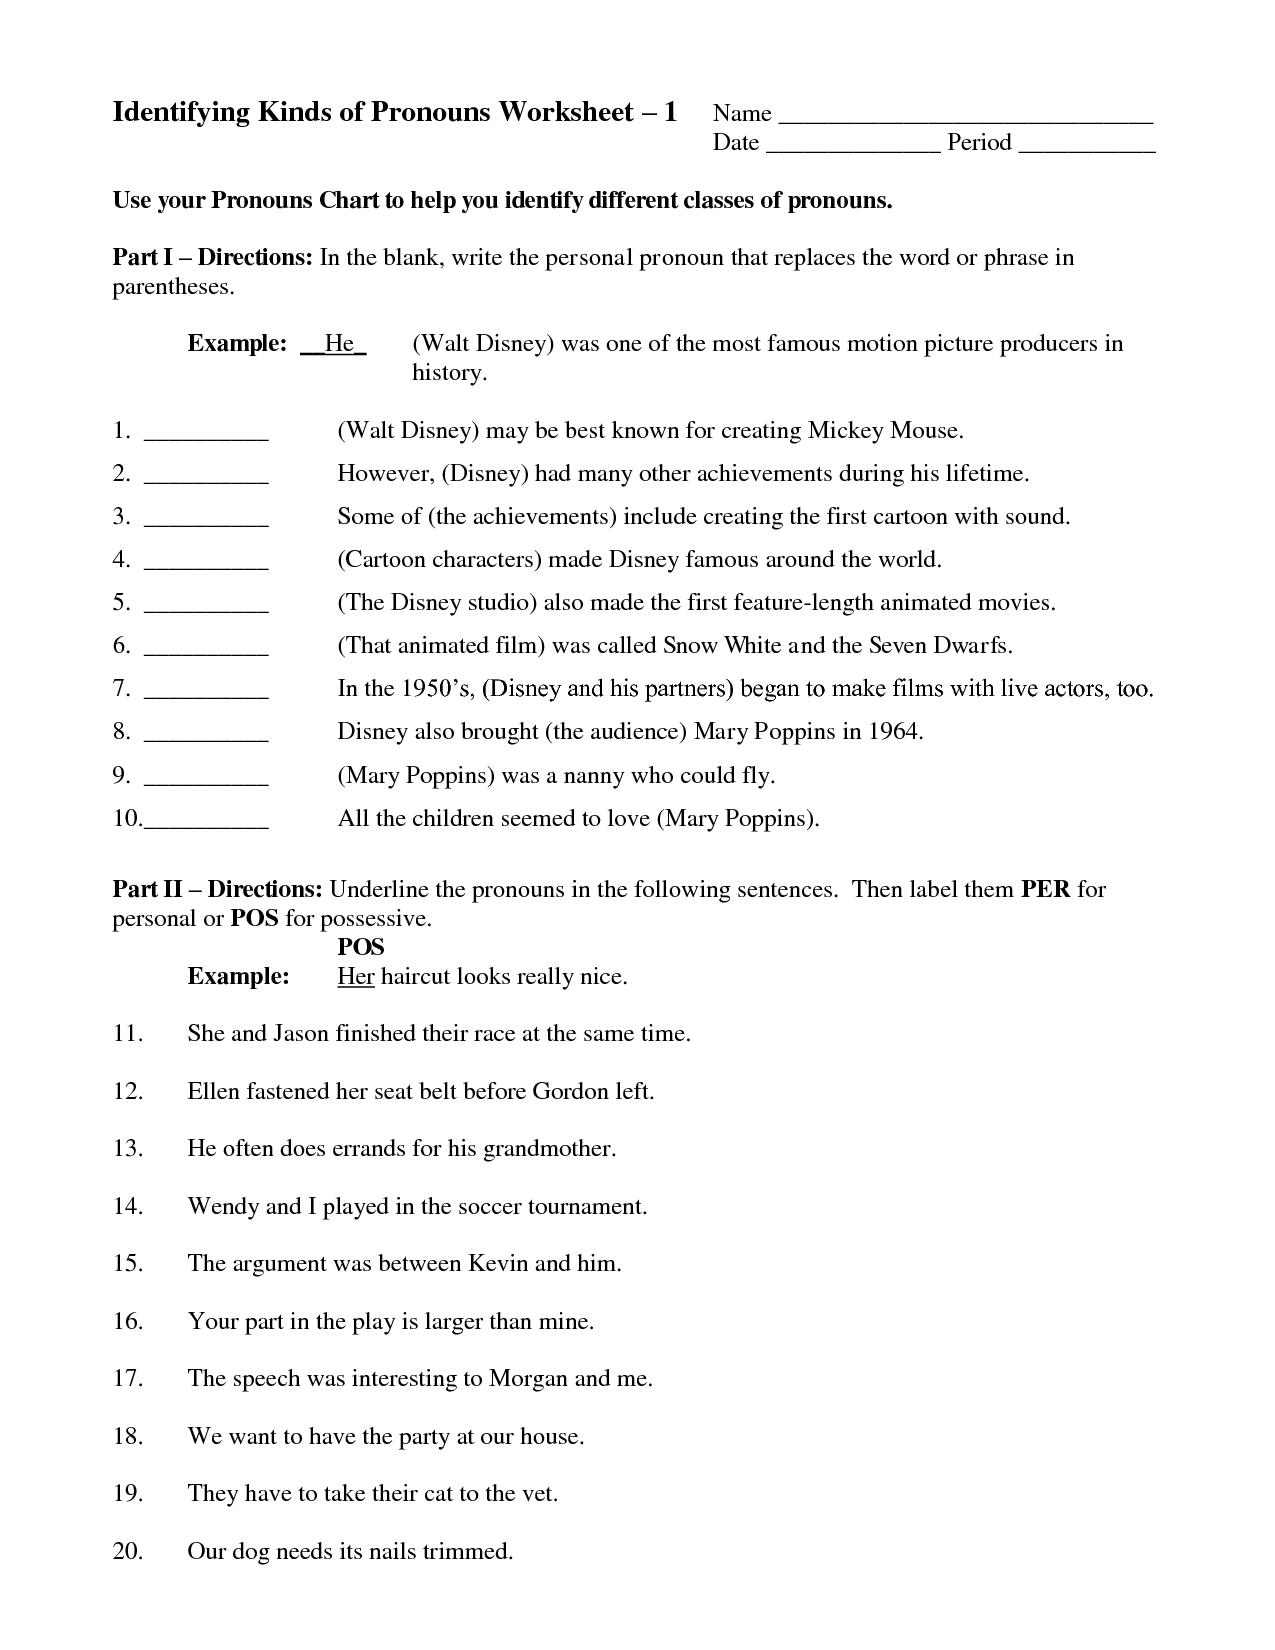 13 Best Images Of Intensive Pronouns Worksheets Reflexive Pronouns Worksheet Reflexive And